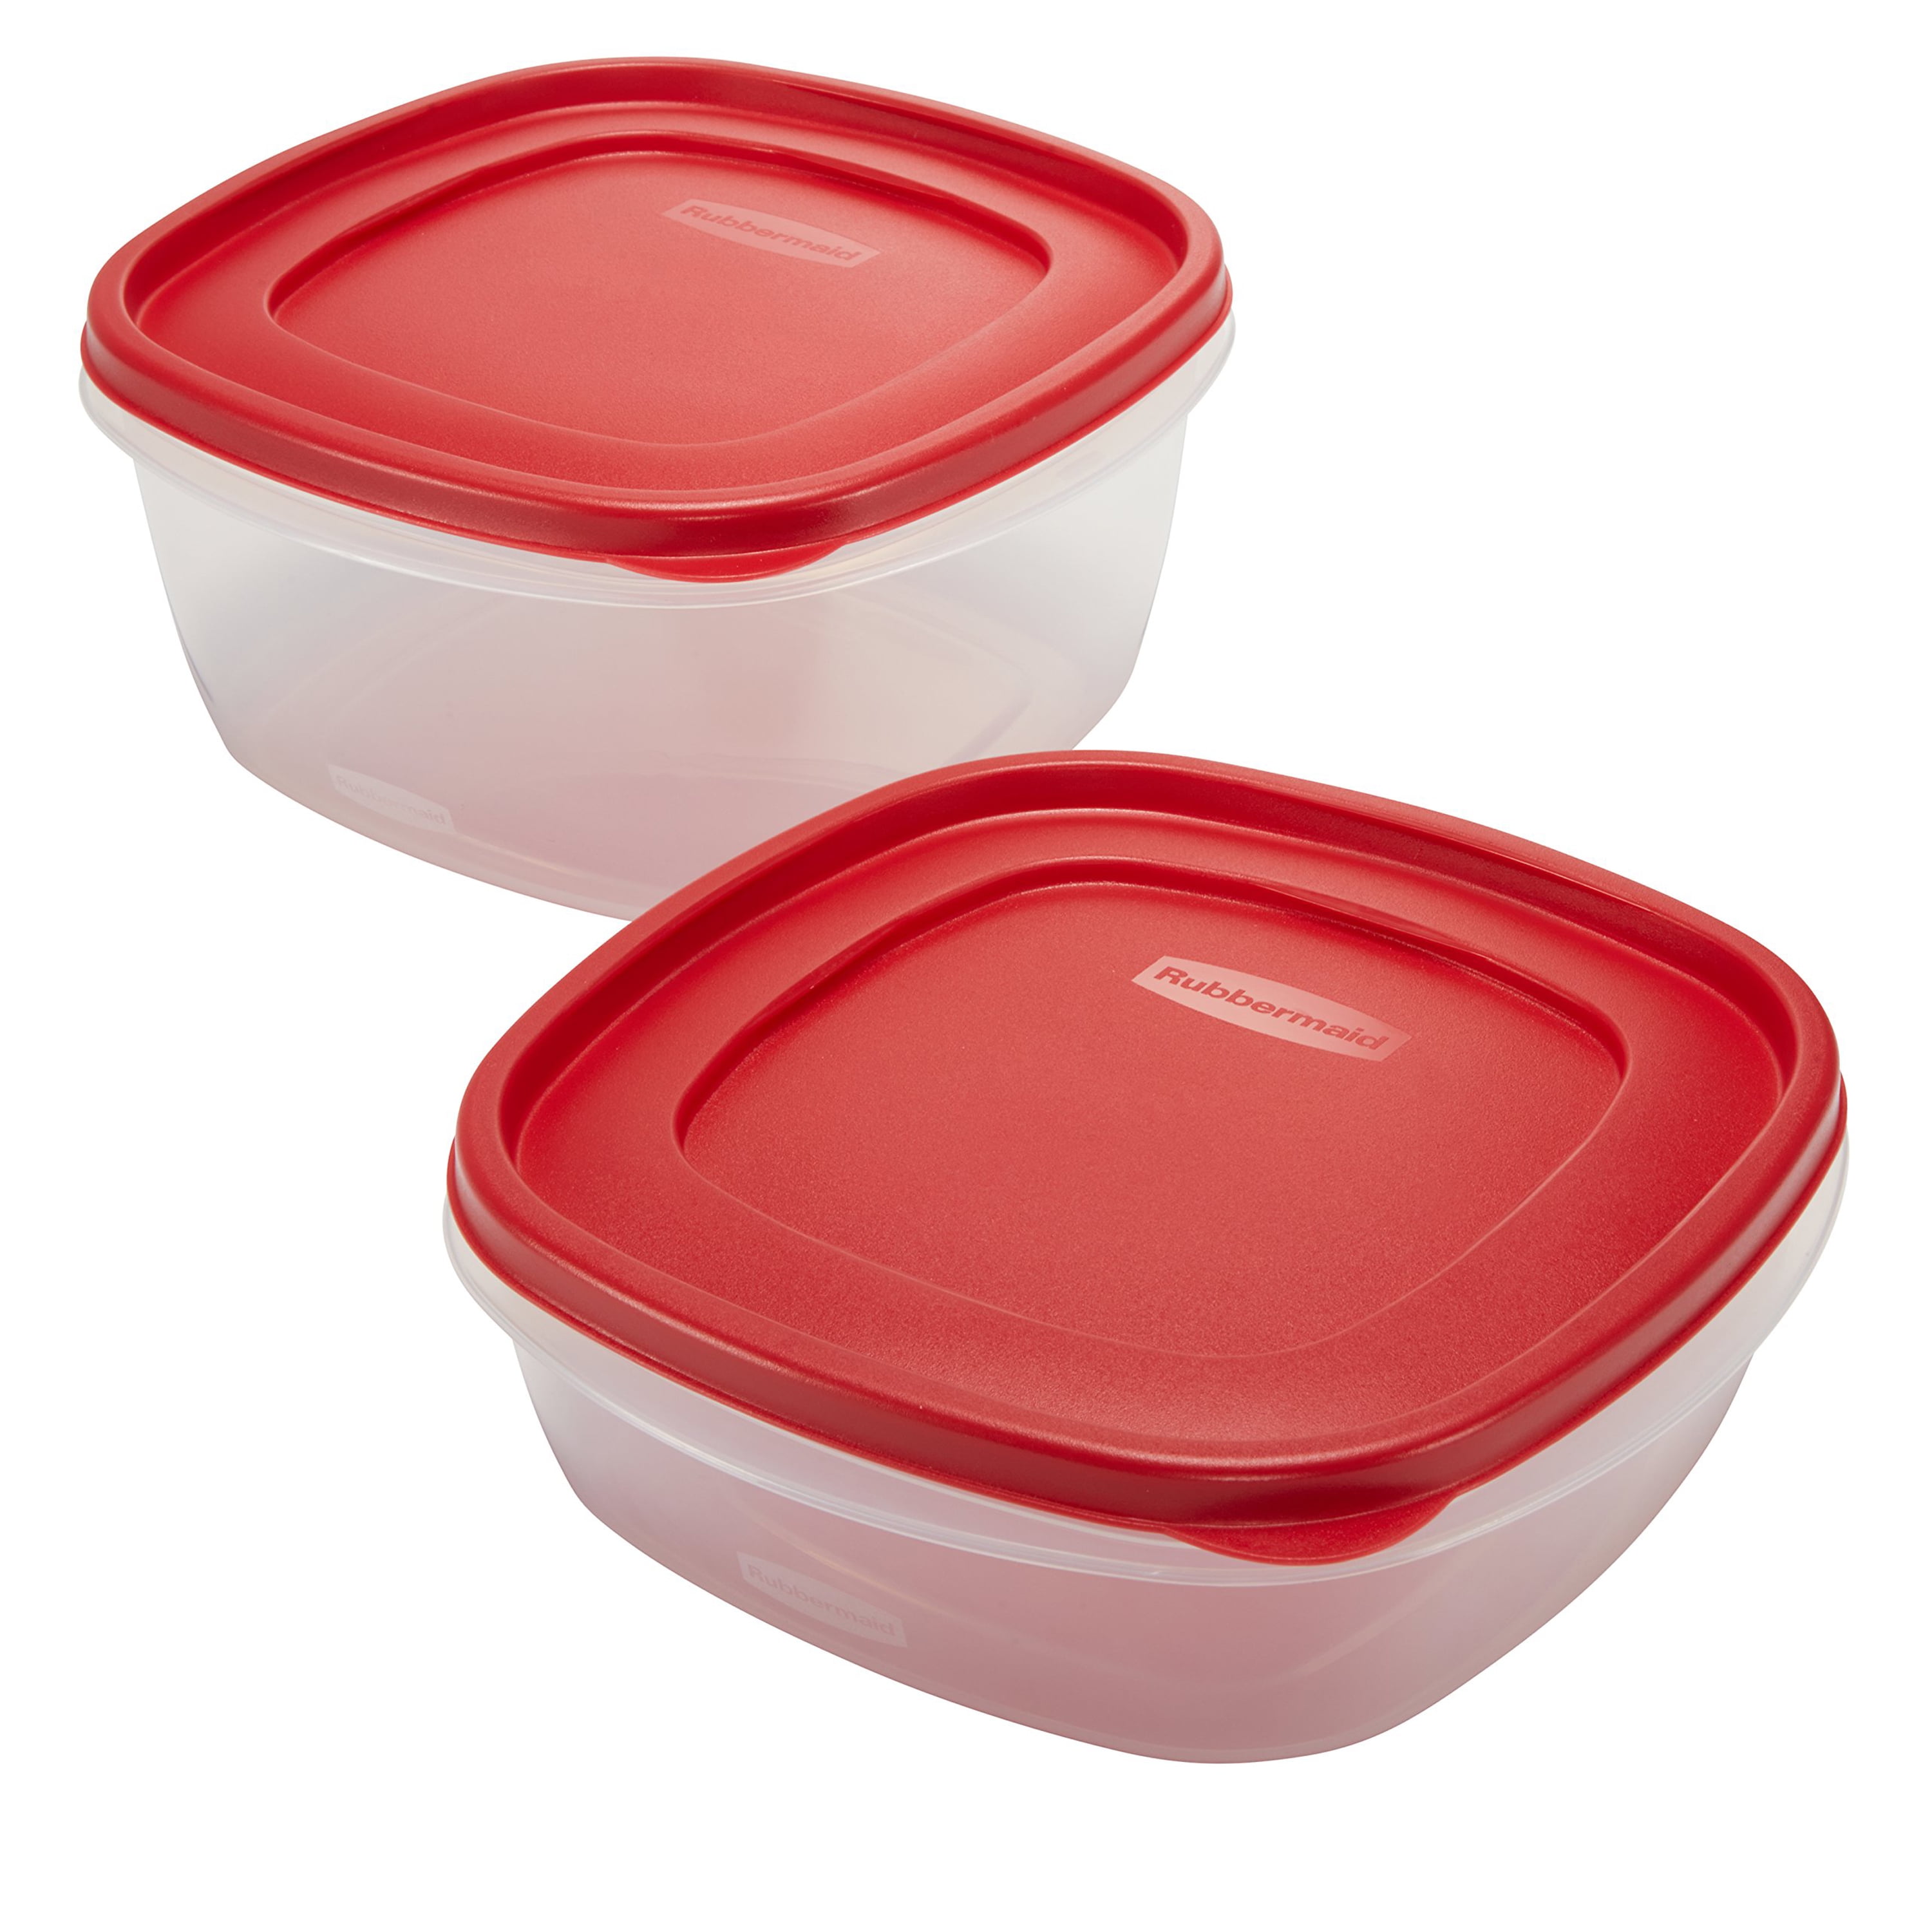 4 Rubbermaid 4” square red EASY FIND replacement lids only 7J58